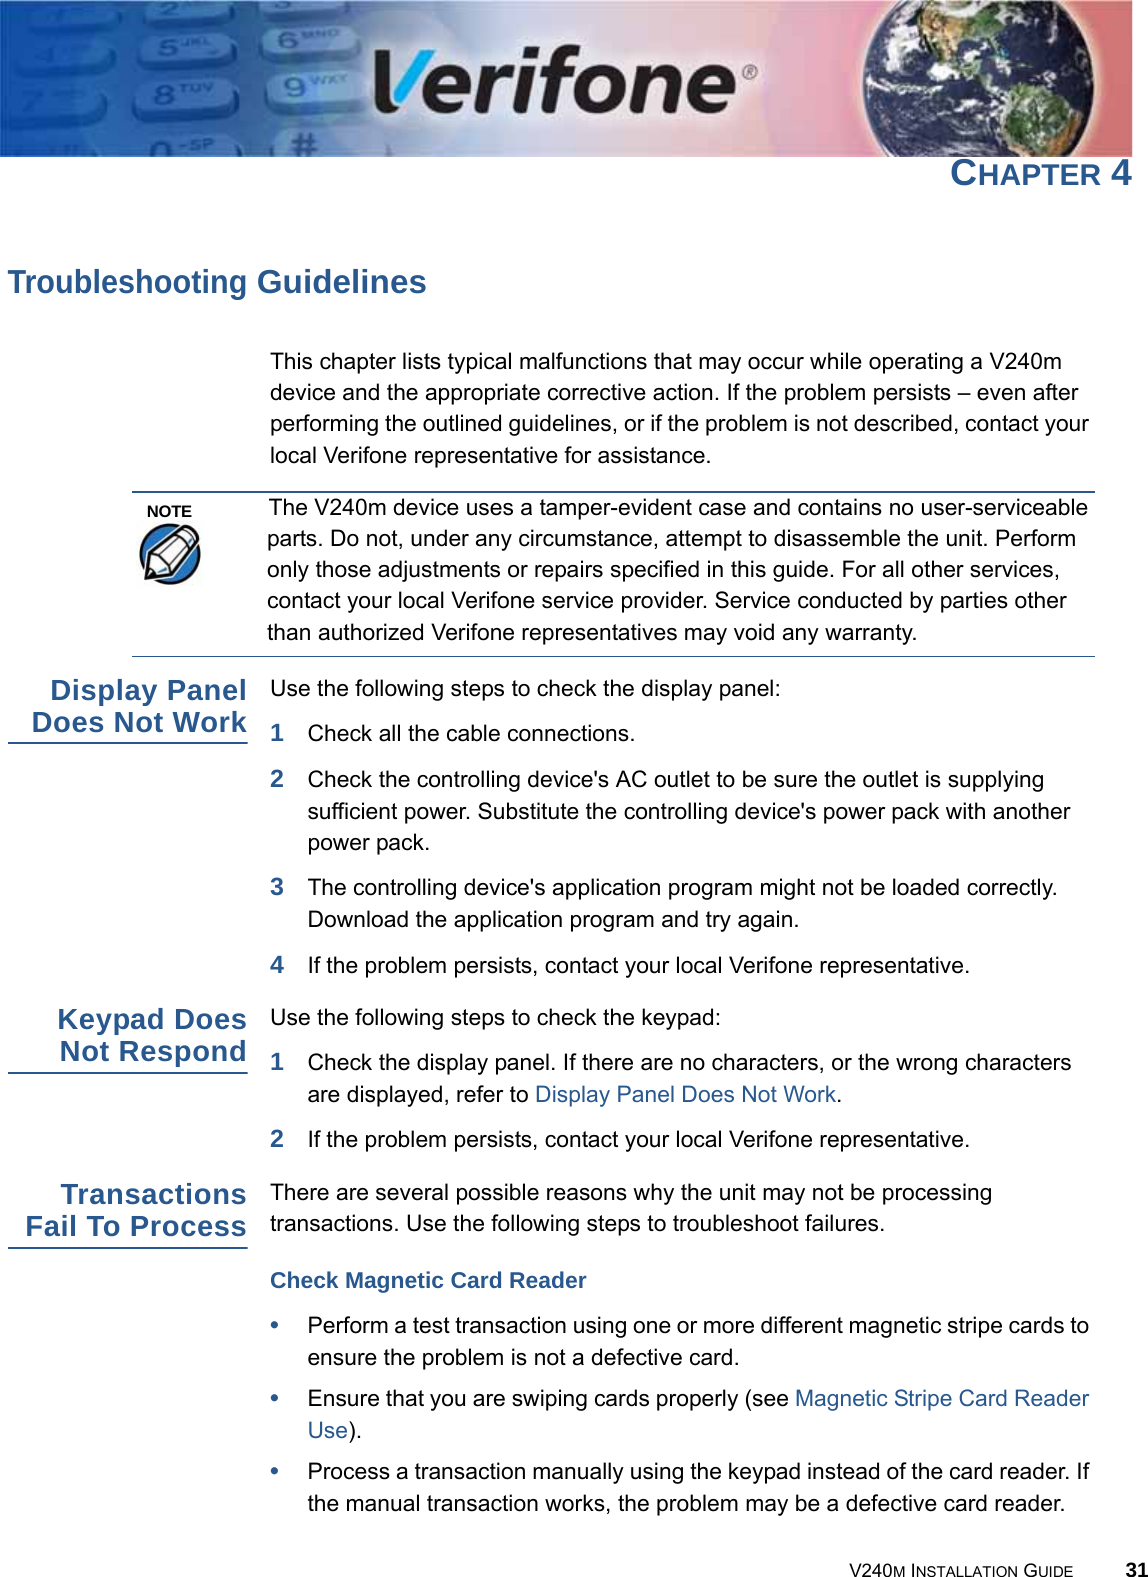 V240M INSTALLATION GUIDE 31CHAPTER 4Troubleshooting GuidelinesThis chapter lists typical malfunctions that may occur while operating a V240m device and the appropriate corrective action. If the problem persists – even after performing the outlined guidelines, or if the problem is not described, contact your local Verifone representative for assistance.The V240m device uses a tamper-evident case and contains no user-serviceable parts. Do not, under any circumstance, attempt to disassemble the unit. Perform only those adjustments or repairs specified in this guide. For all other services, contact your local Verifone service provider. Service conducted by parties other than authorized Verifone representatives may void any warranty.Display Panel Does Not Work Use the following steps to check the display panel:1Check all the cable connections.2Check the controlling device&apos;s AC outlet to be sure the outlet is supplying sufficient power. Substitute the controlling device&apos;s power pack with another power pack.3The controlling device&apos;s application program might not be loaded correctly. Download the application program and try again.4If the problem persists, contact your local Verifone representative.Keypad Does Not Respond Use the following steps to check the keypad:1Check the display panel. If there are no characters, or the wrong characters are displayed, refer to Display Panel Does Not Work.2If the problem persists, contact your local Verifone representative.Transactions Fail To Process There are several possible reasons why the unit may not be processing transactions. Use the following steps to troubleshoot failures.Check Magnetic Card Reader•Perform a test transaction using one or more different magnetic stripe cards to ensure the problem is not a defective card.•Ensure that you are swiping cards properly (see Magnetic Stripe Card Reader Use).•Process a transaction manually using the keypad instead of the card reader. If the manual transaction works, the problem may be a defective card reader.NOTE